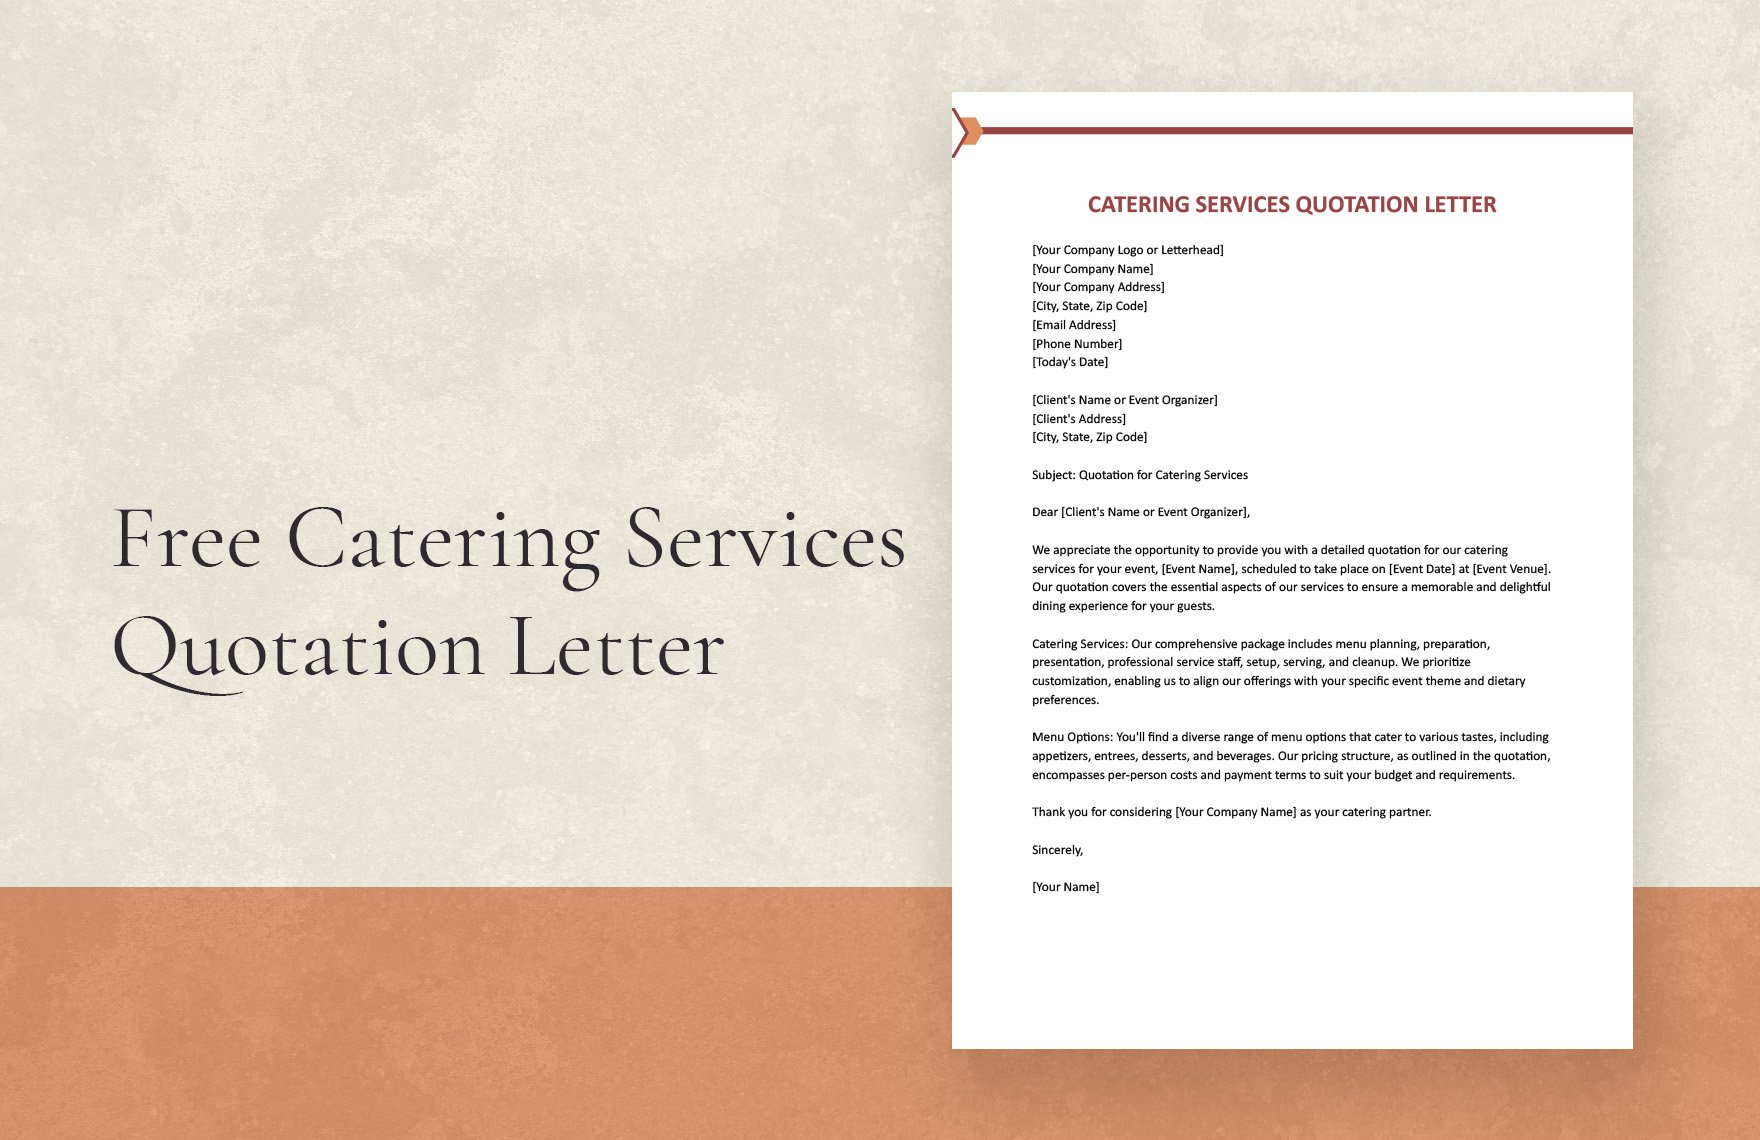 Free Catering Services Quotation Letter